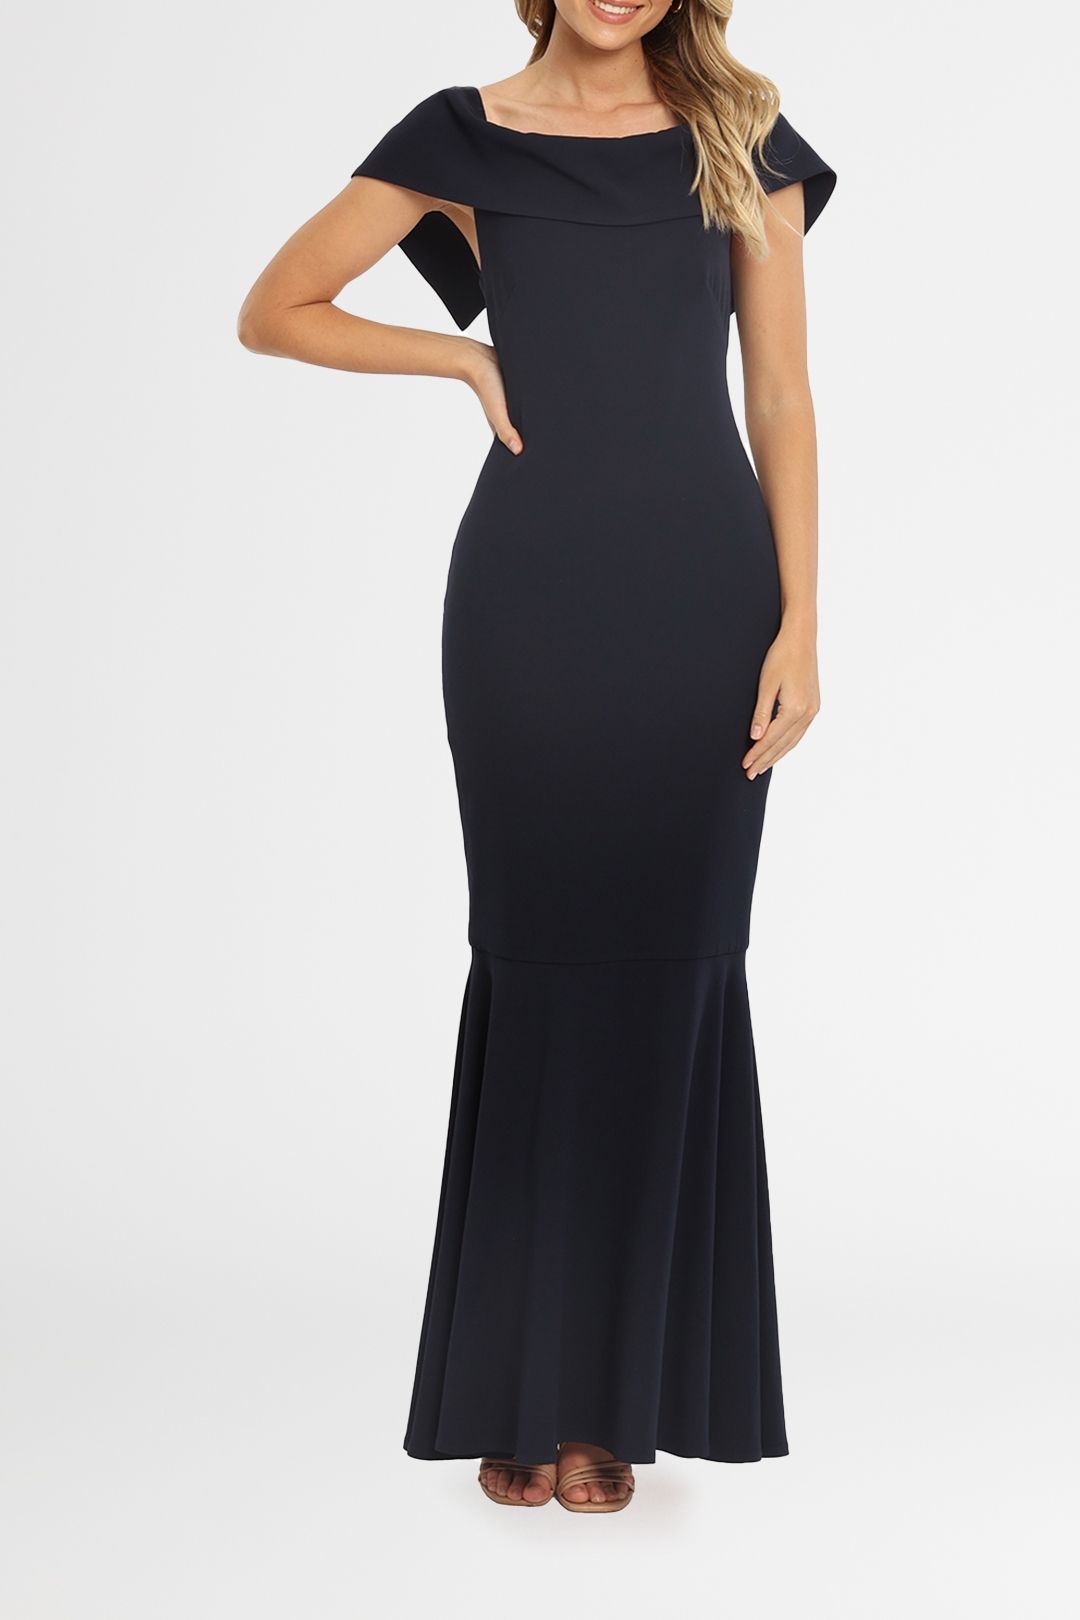 Camilla and Marc Akane Gown navy